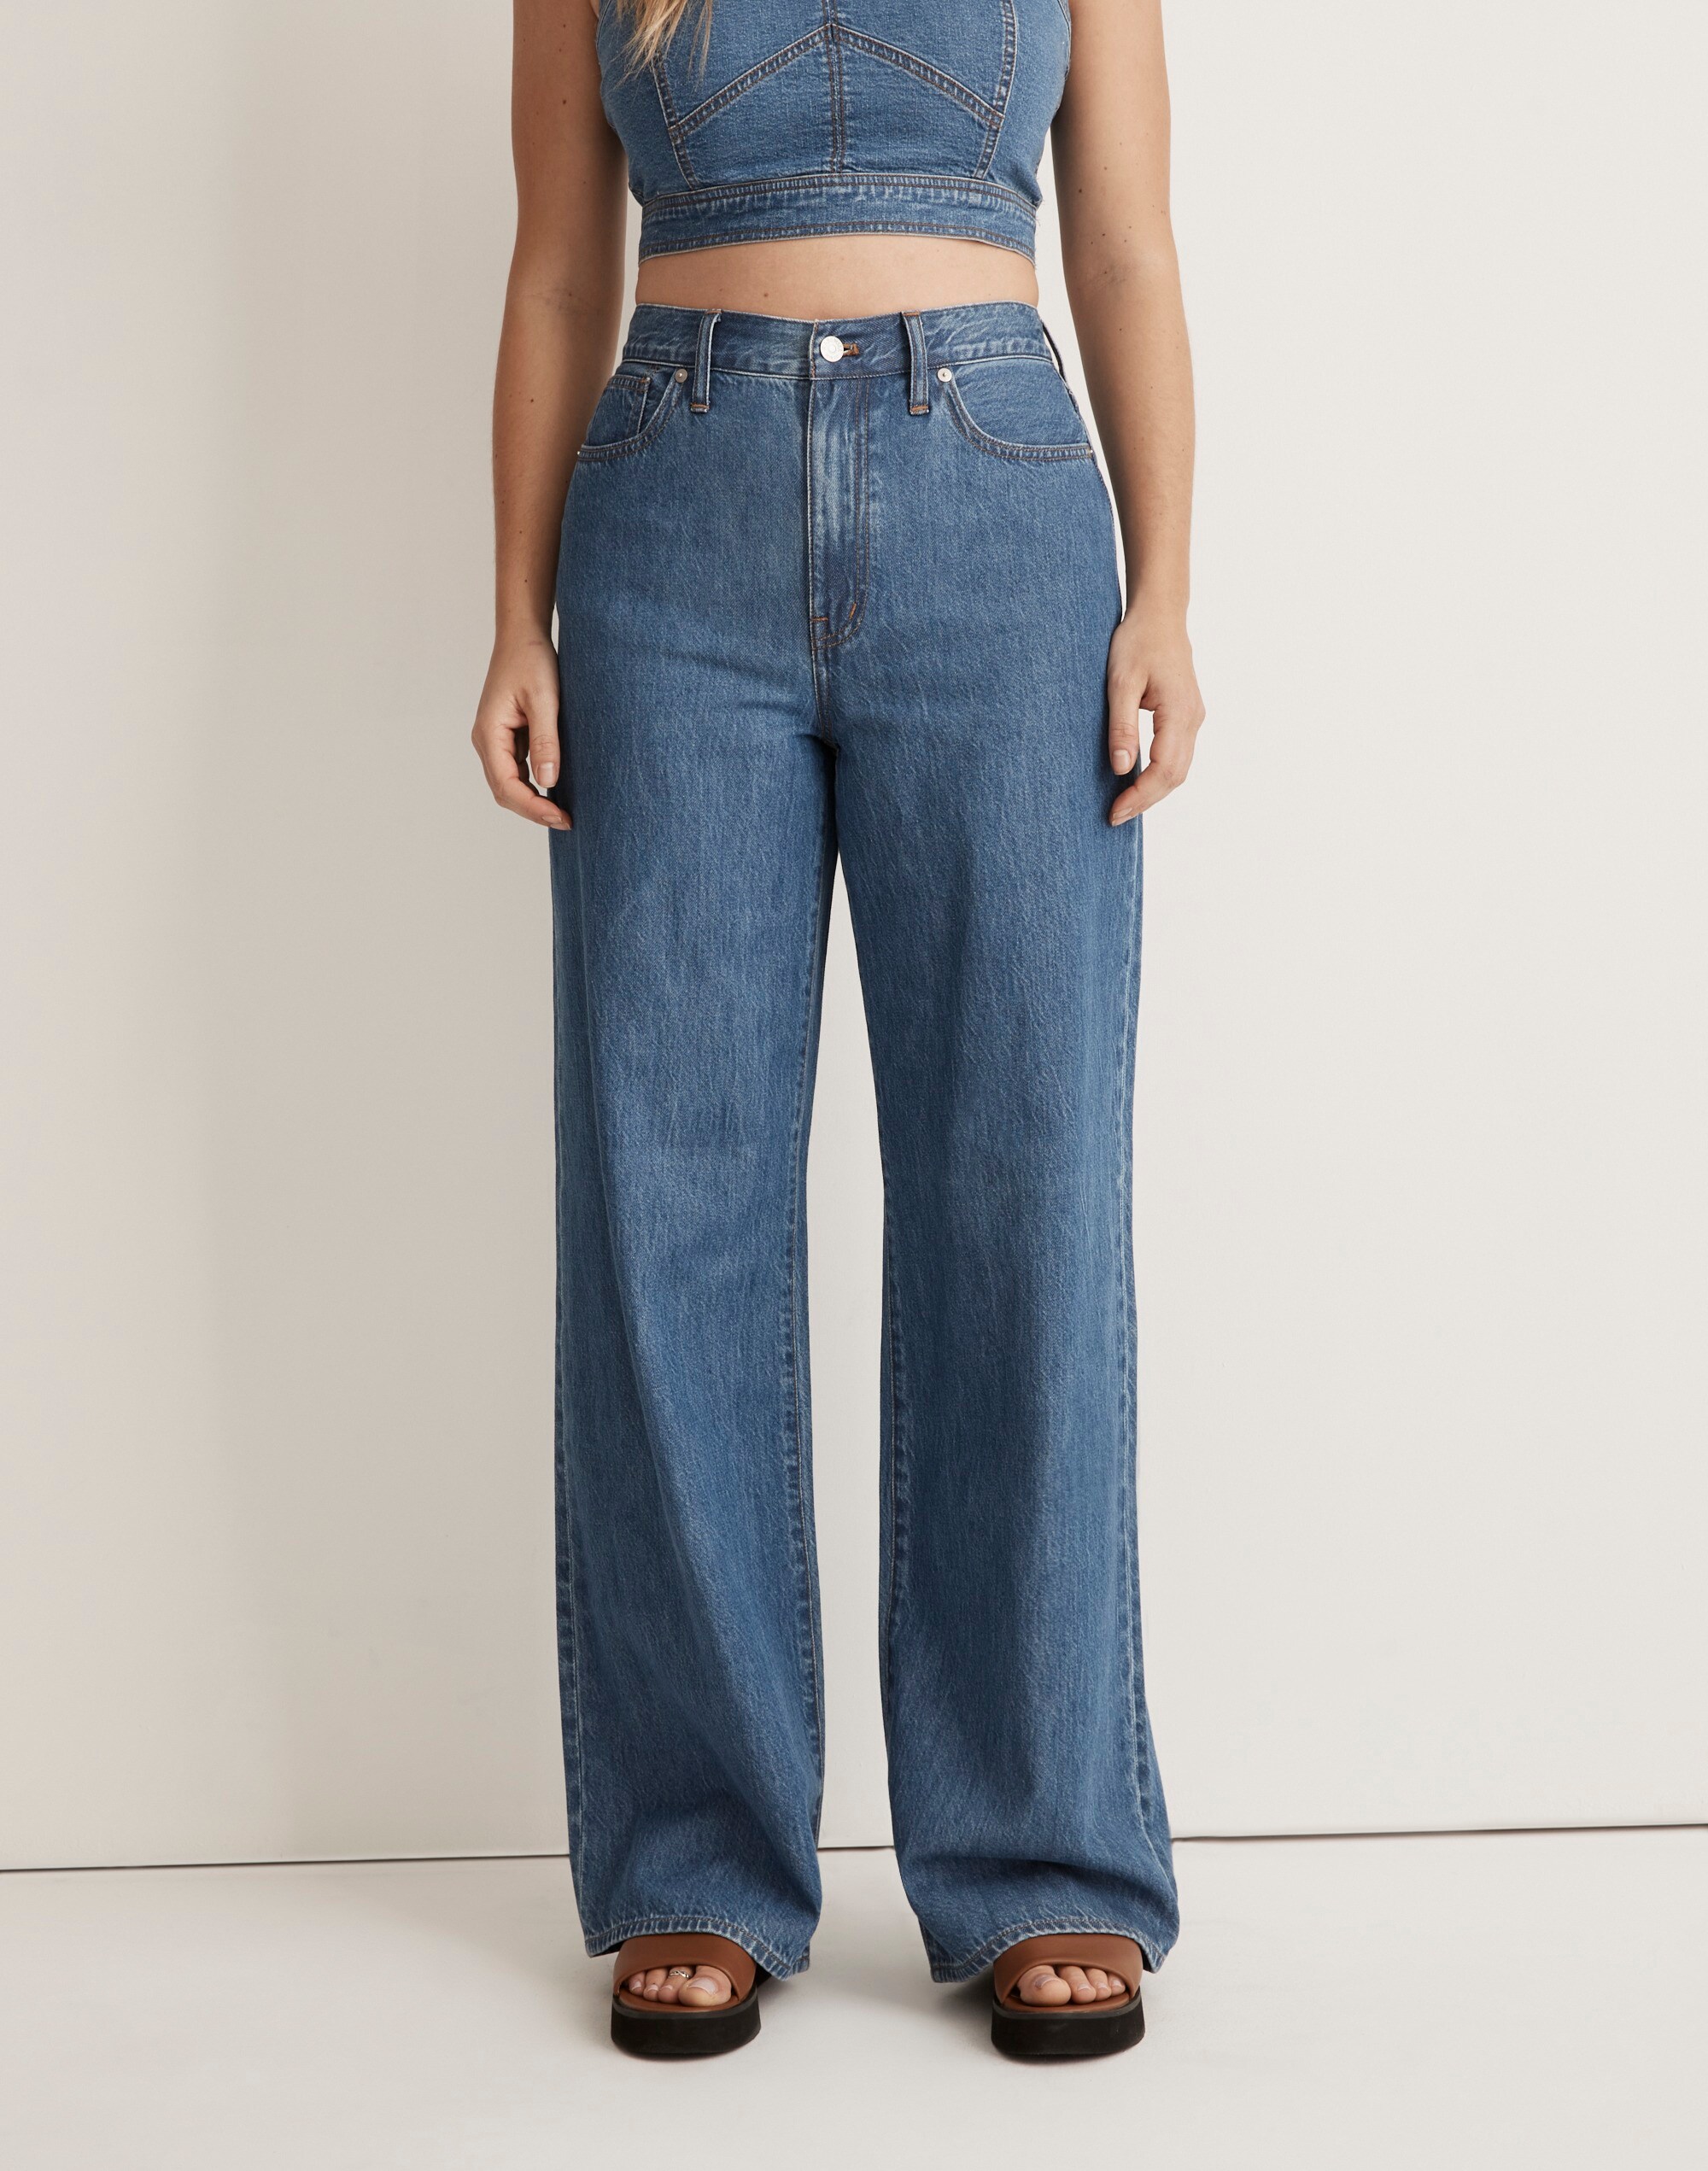 Superwide-Leg Jeans in Lessard Wash